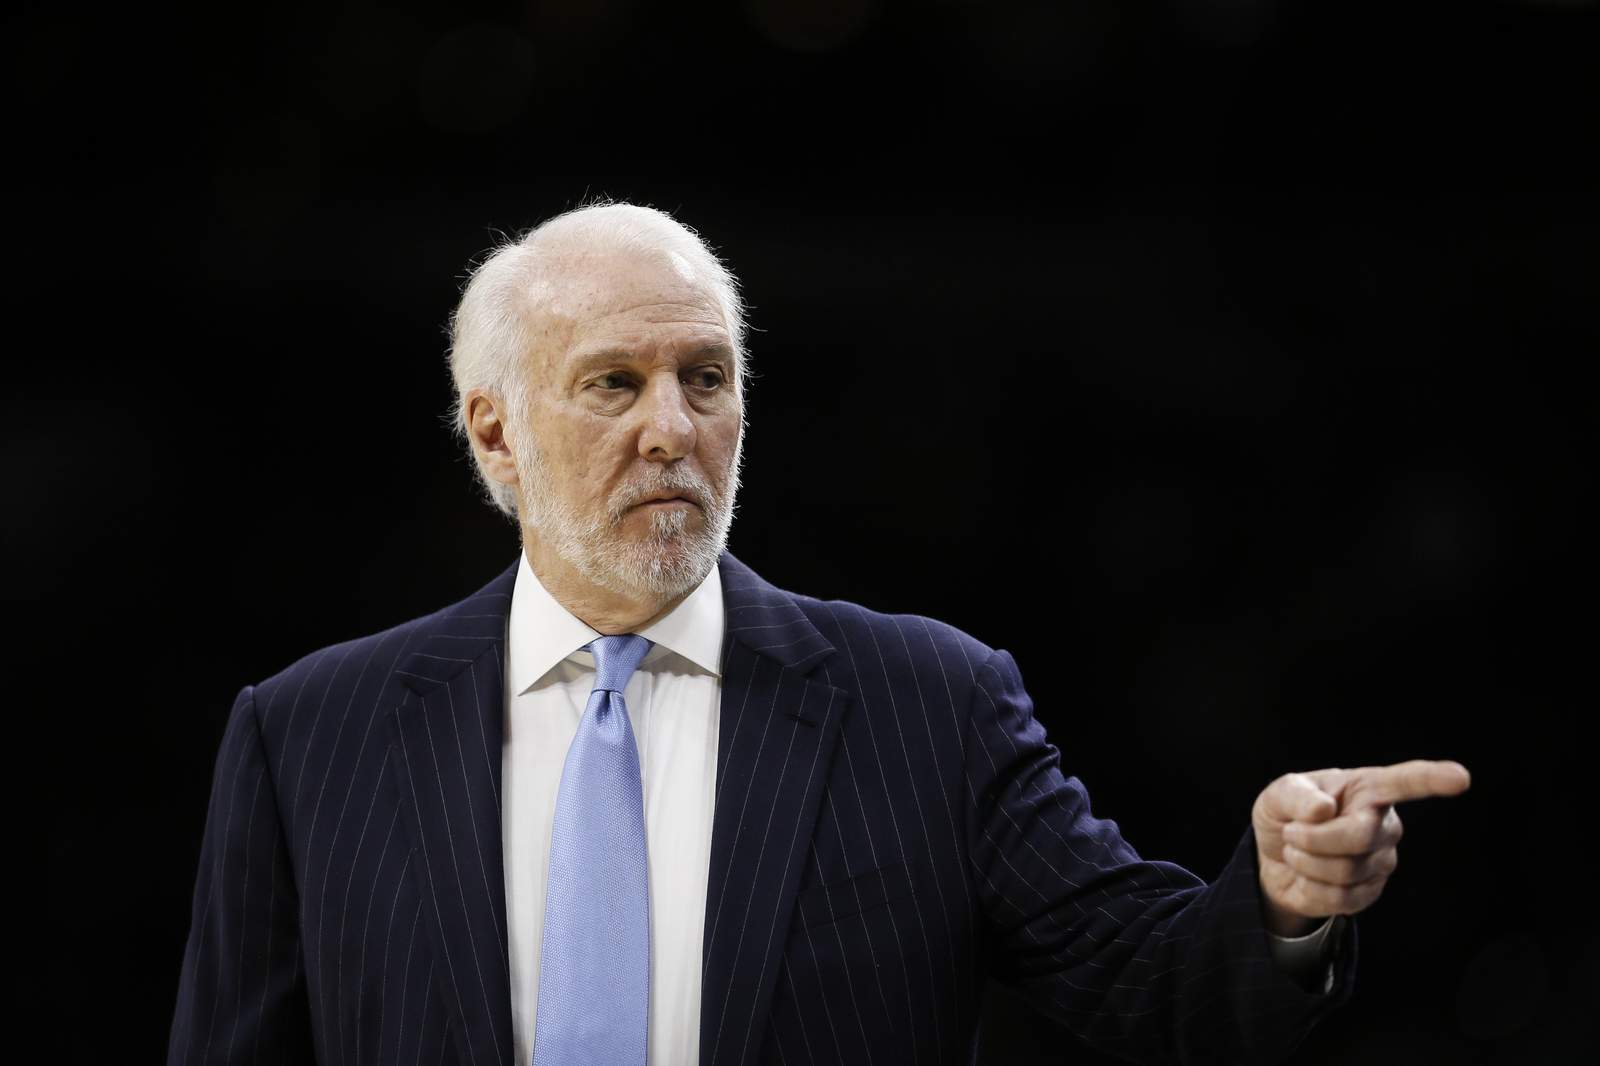 Spurs Popovich talks NBA restart, racial injustice: We have to get to the reparations discussion